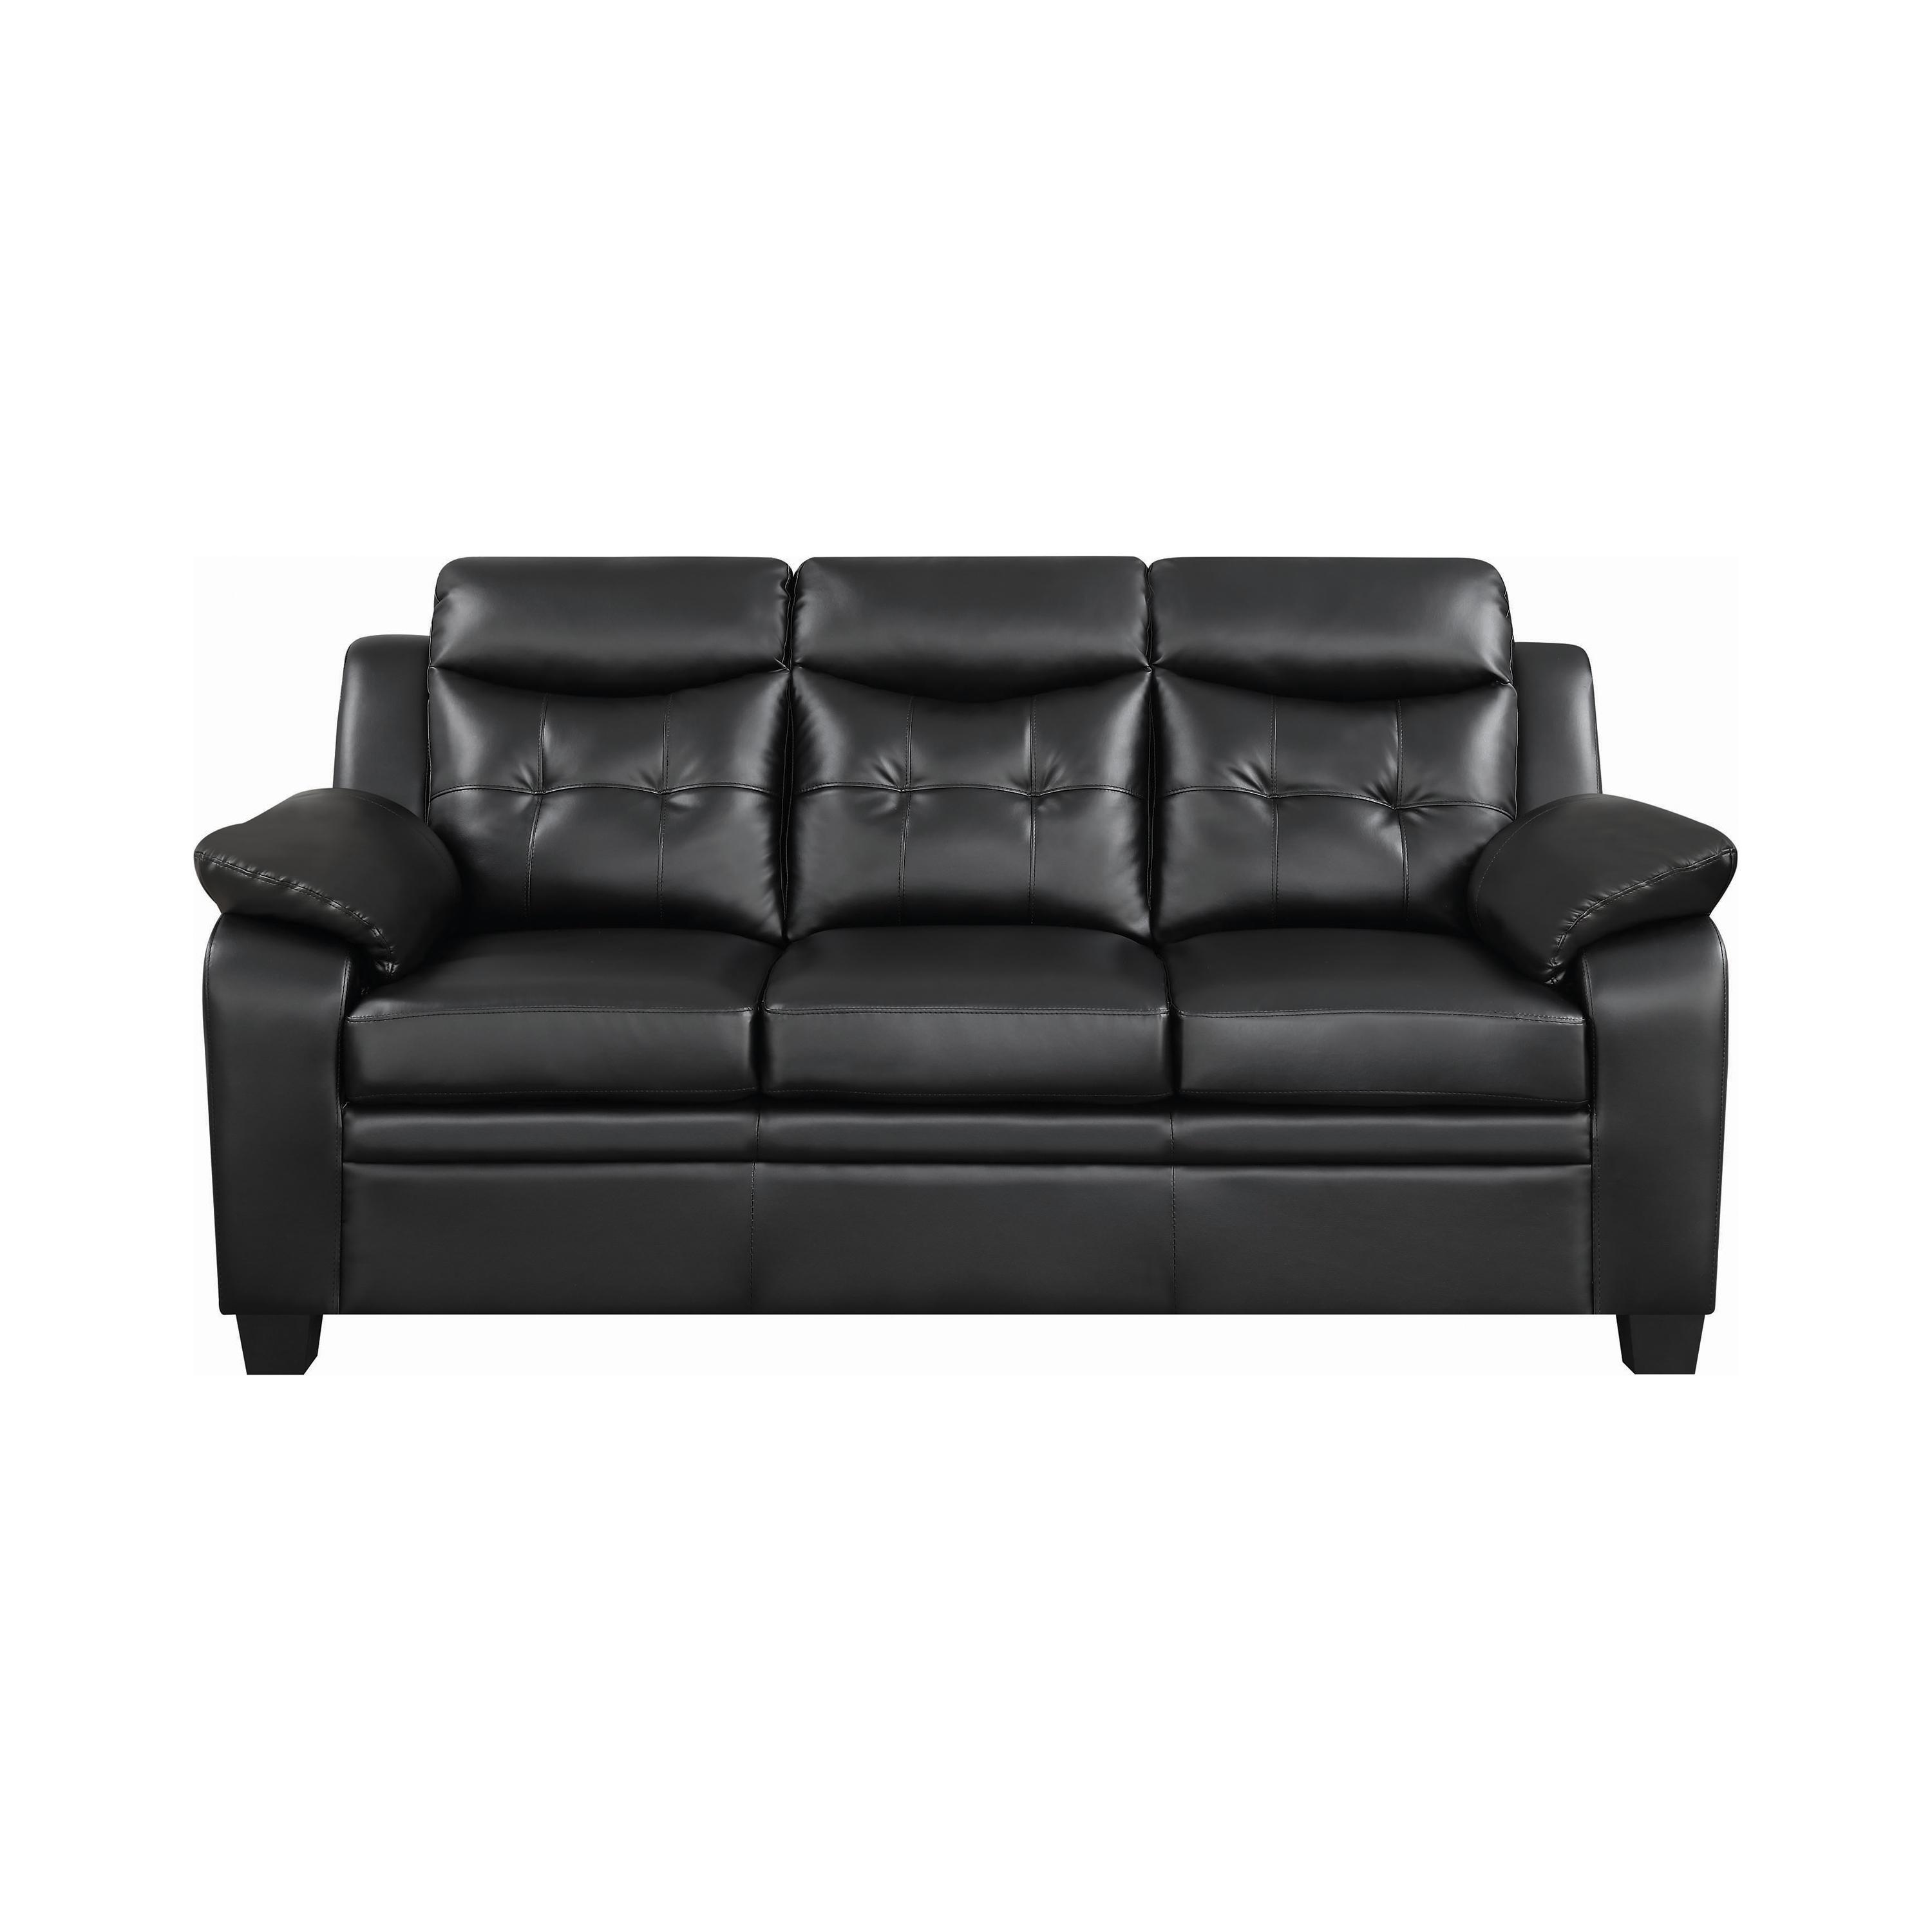 Transitional Sofa 506551 Finley 506551 in Black Leatherette